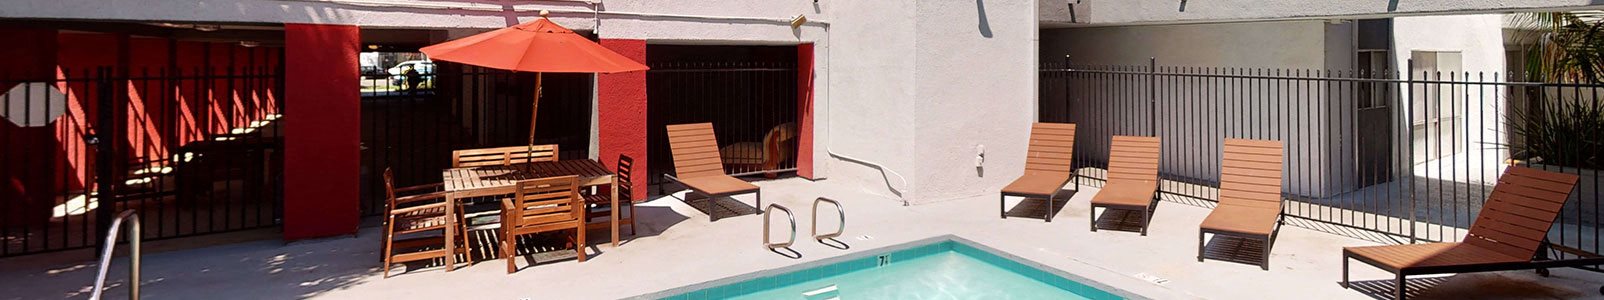 Swimming Pool Area With Shaded Chairs at City Park View, California